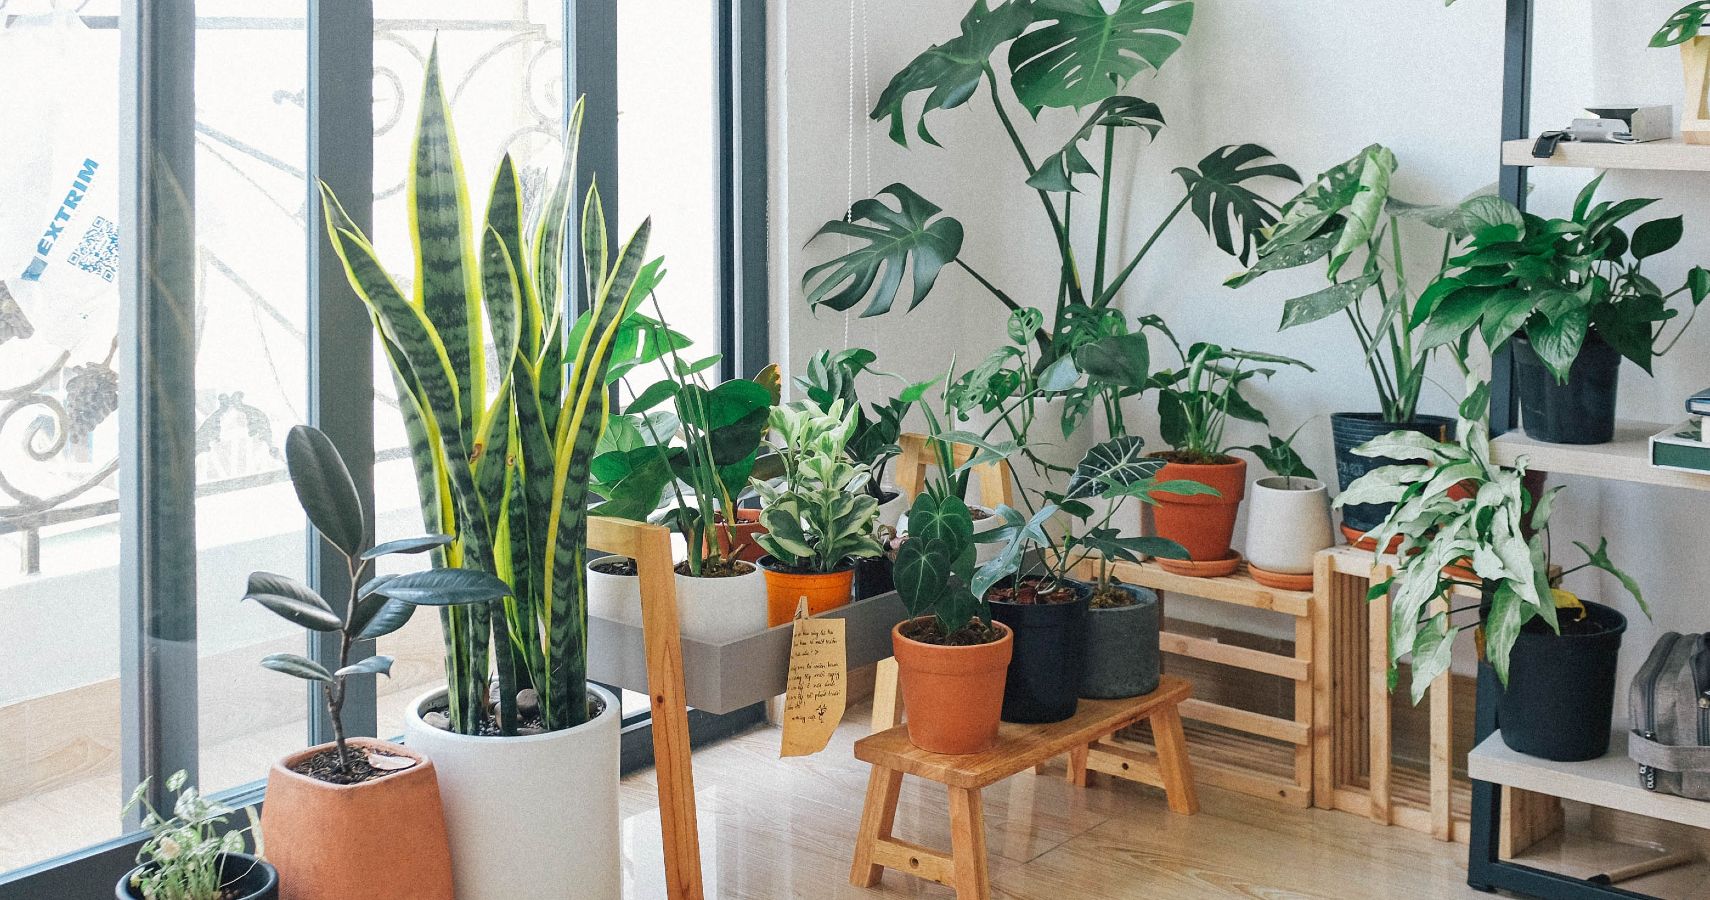 plants improve air quality of home